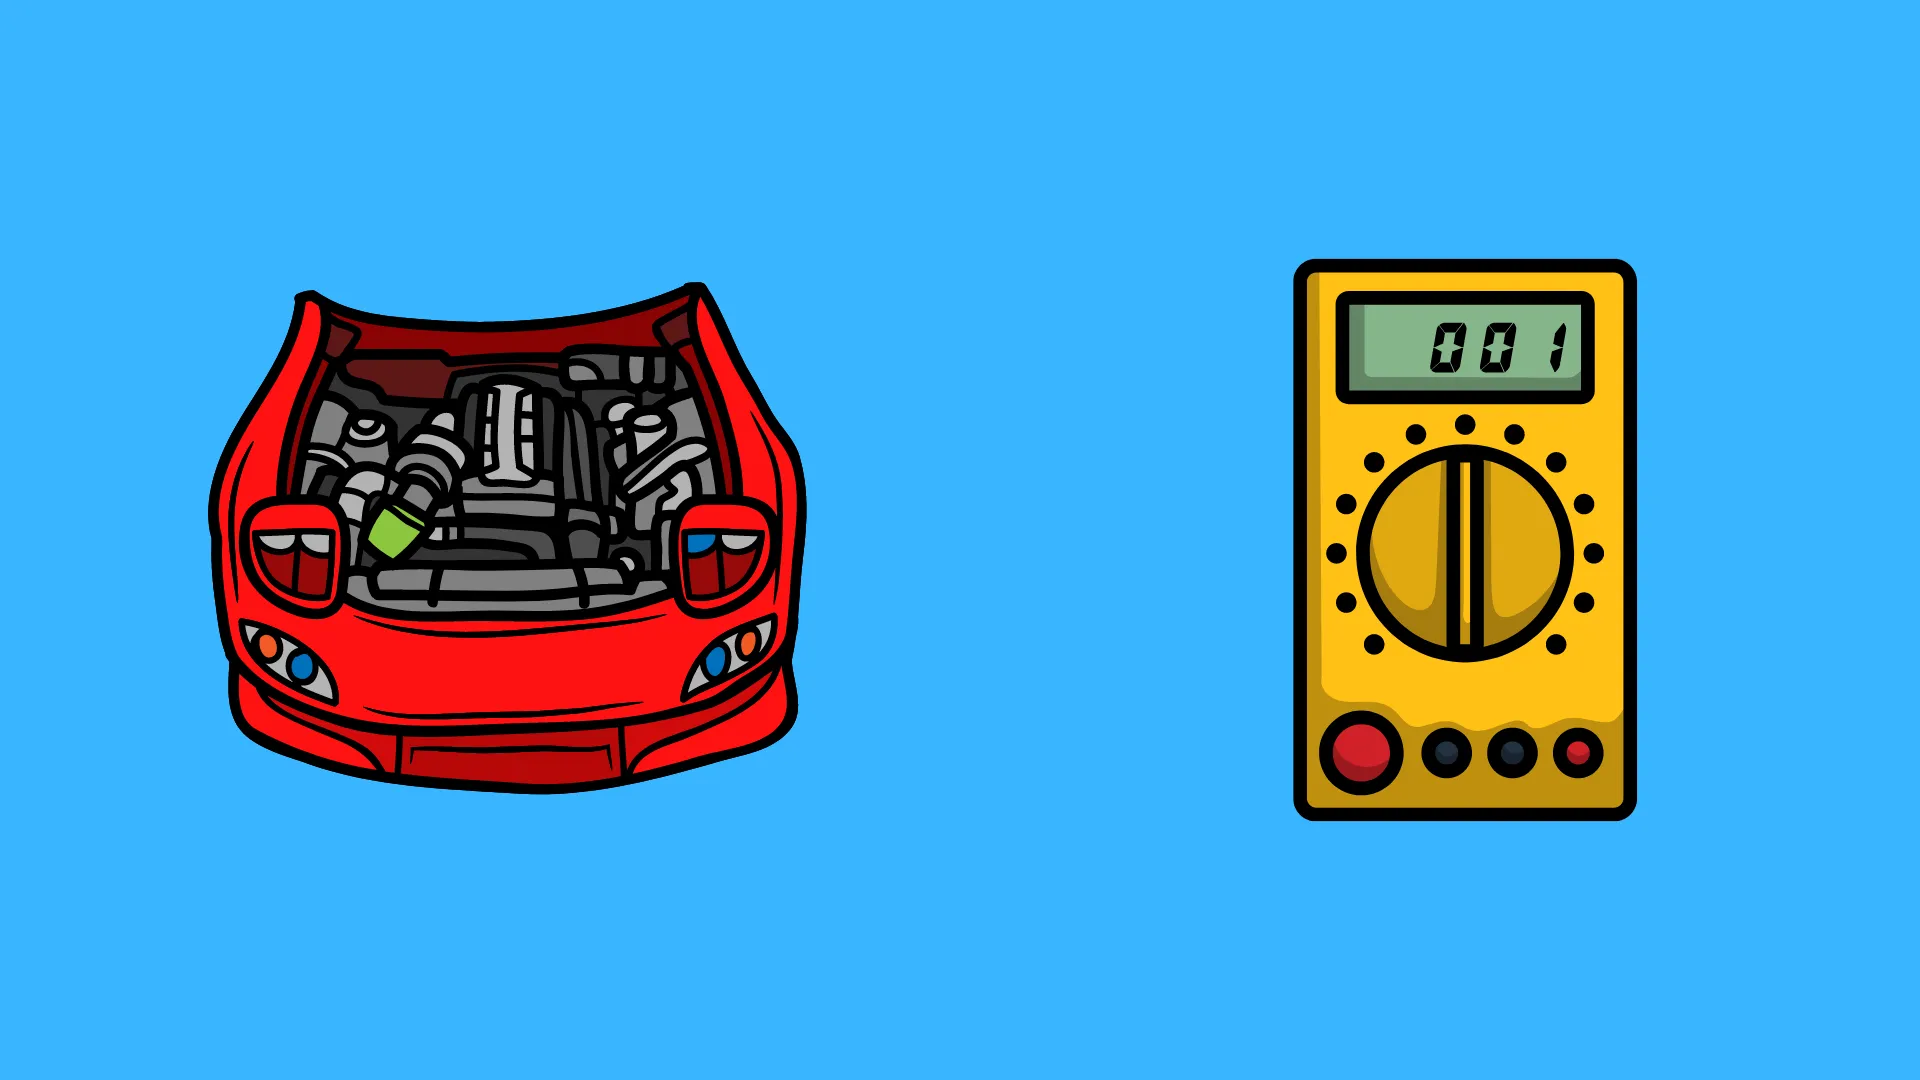 How To Test BCM With Multimeter